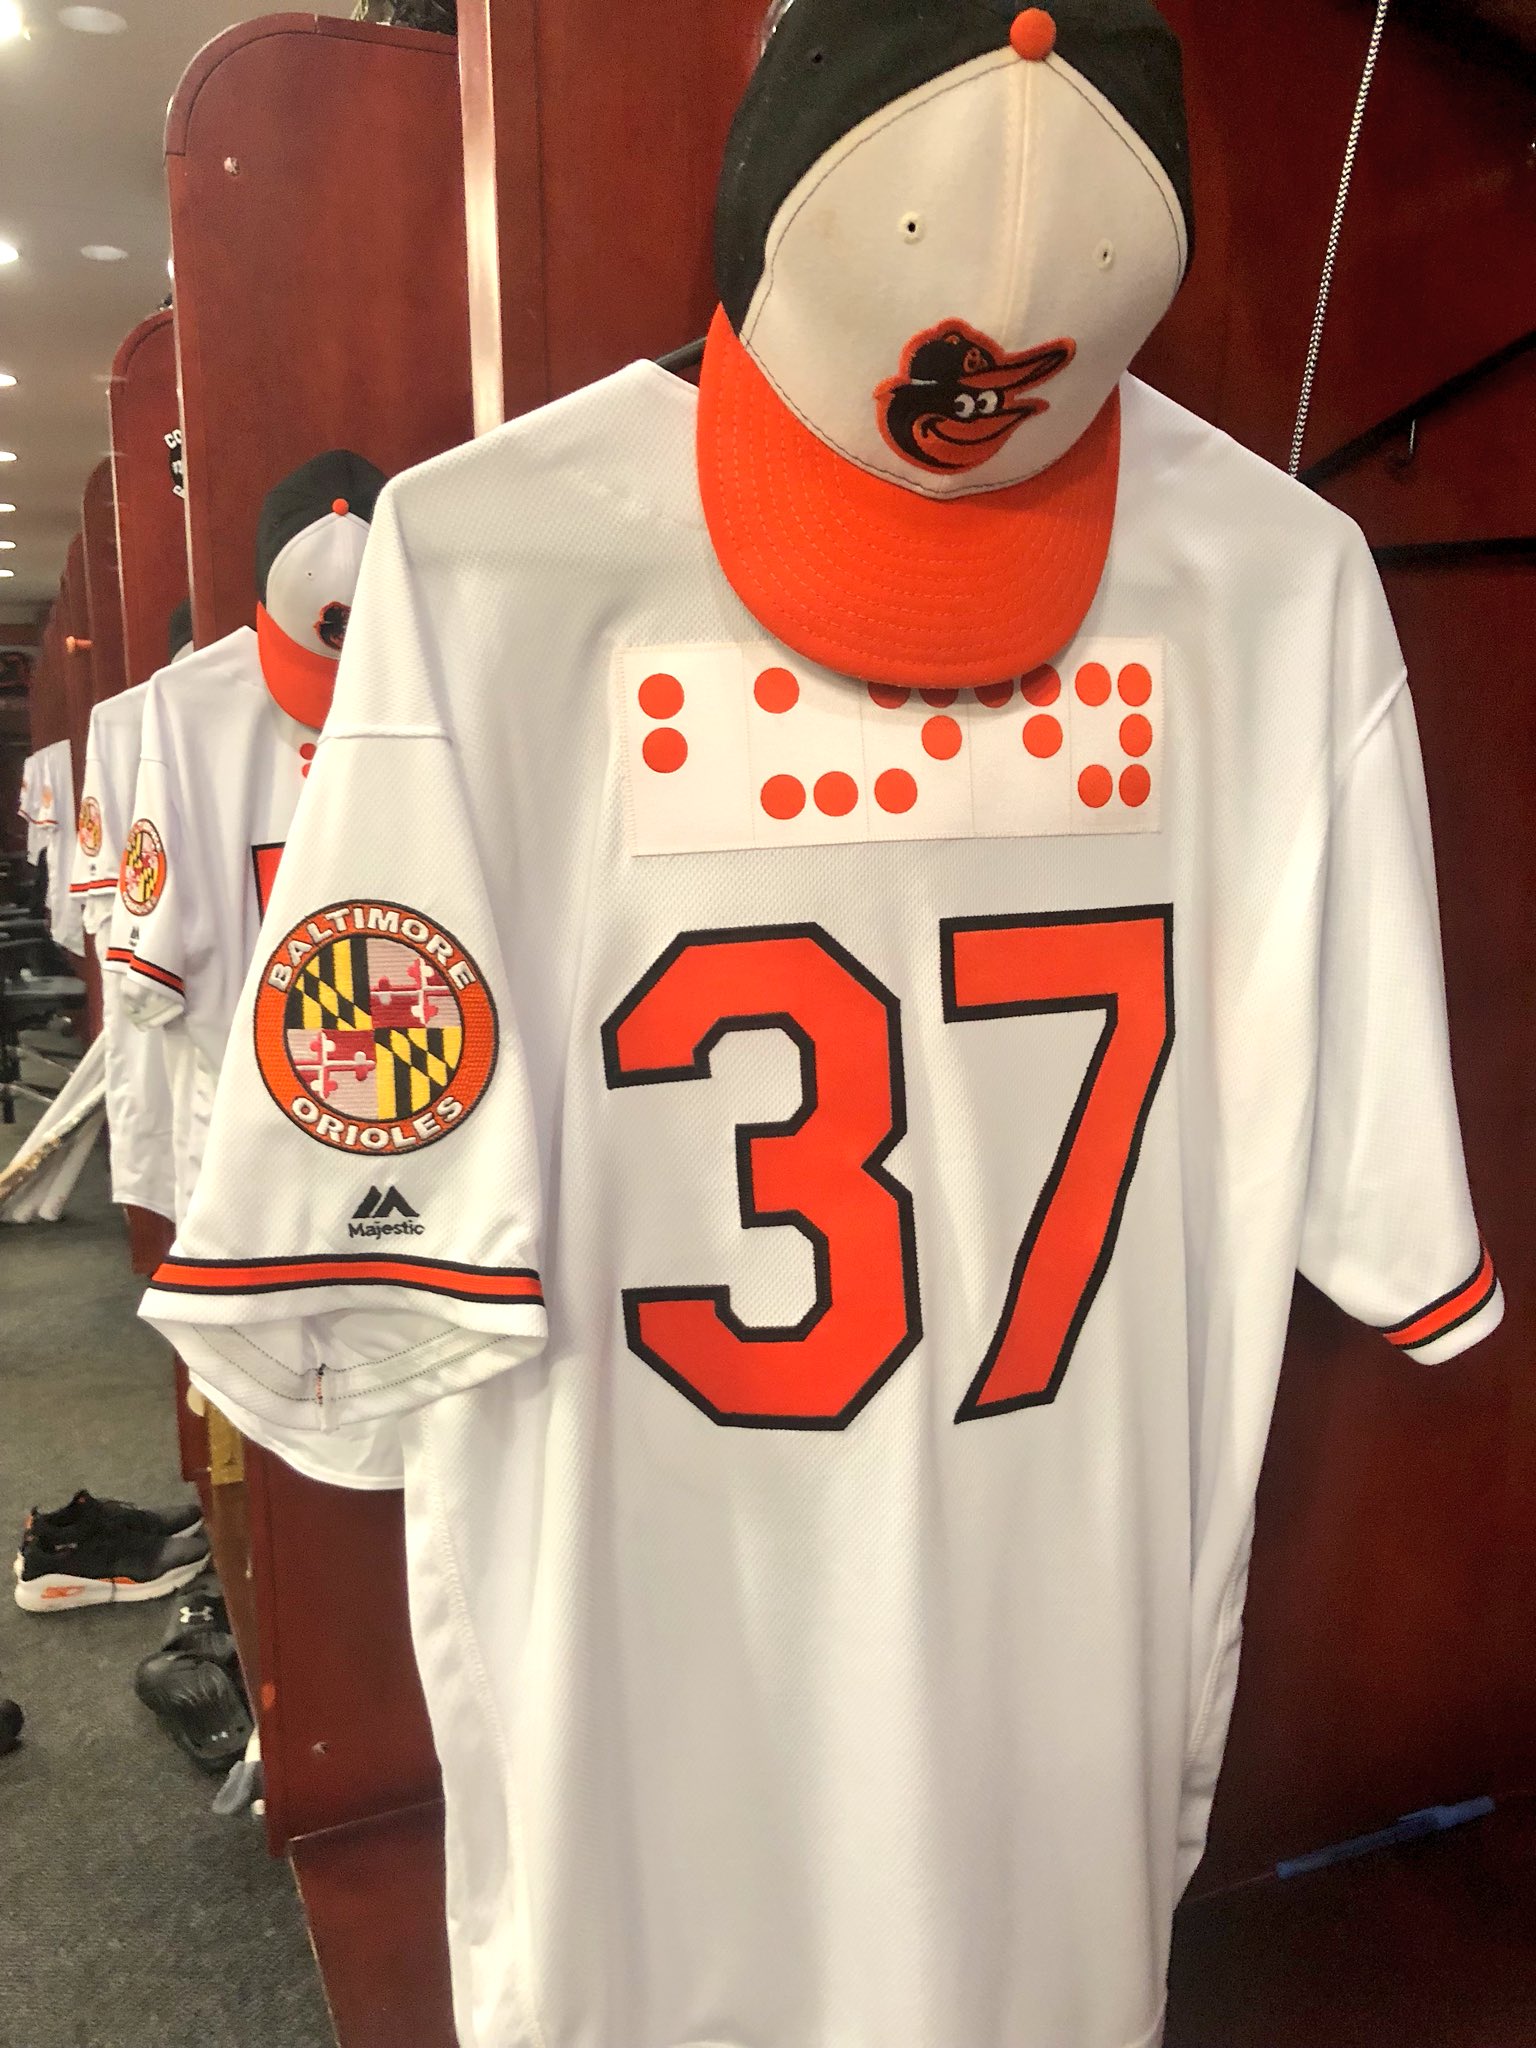 Baltimore Orioles on X: Tonight, in recognition of the 40th